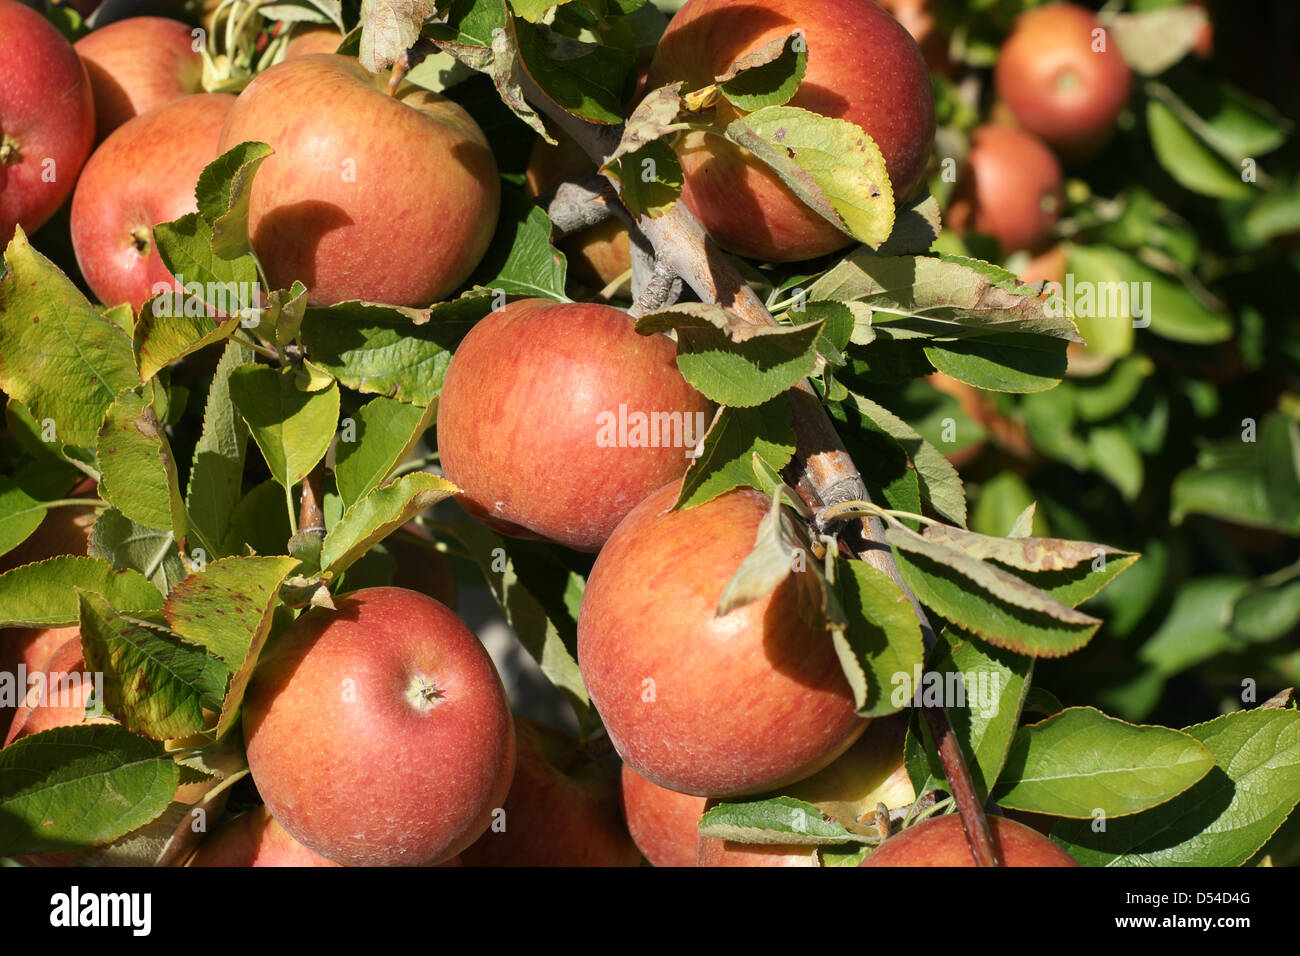 A crop of ripening Braeburn apples in a New Zealand Orchard Stock Photo